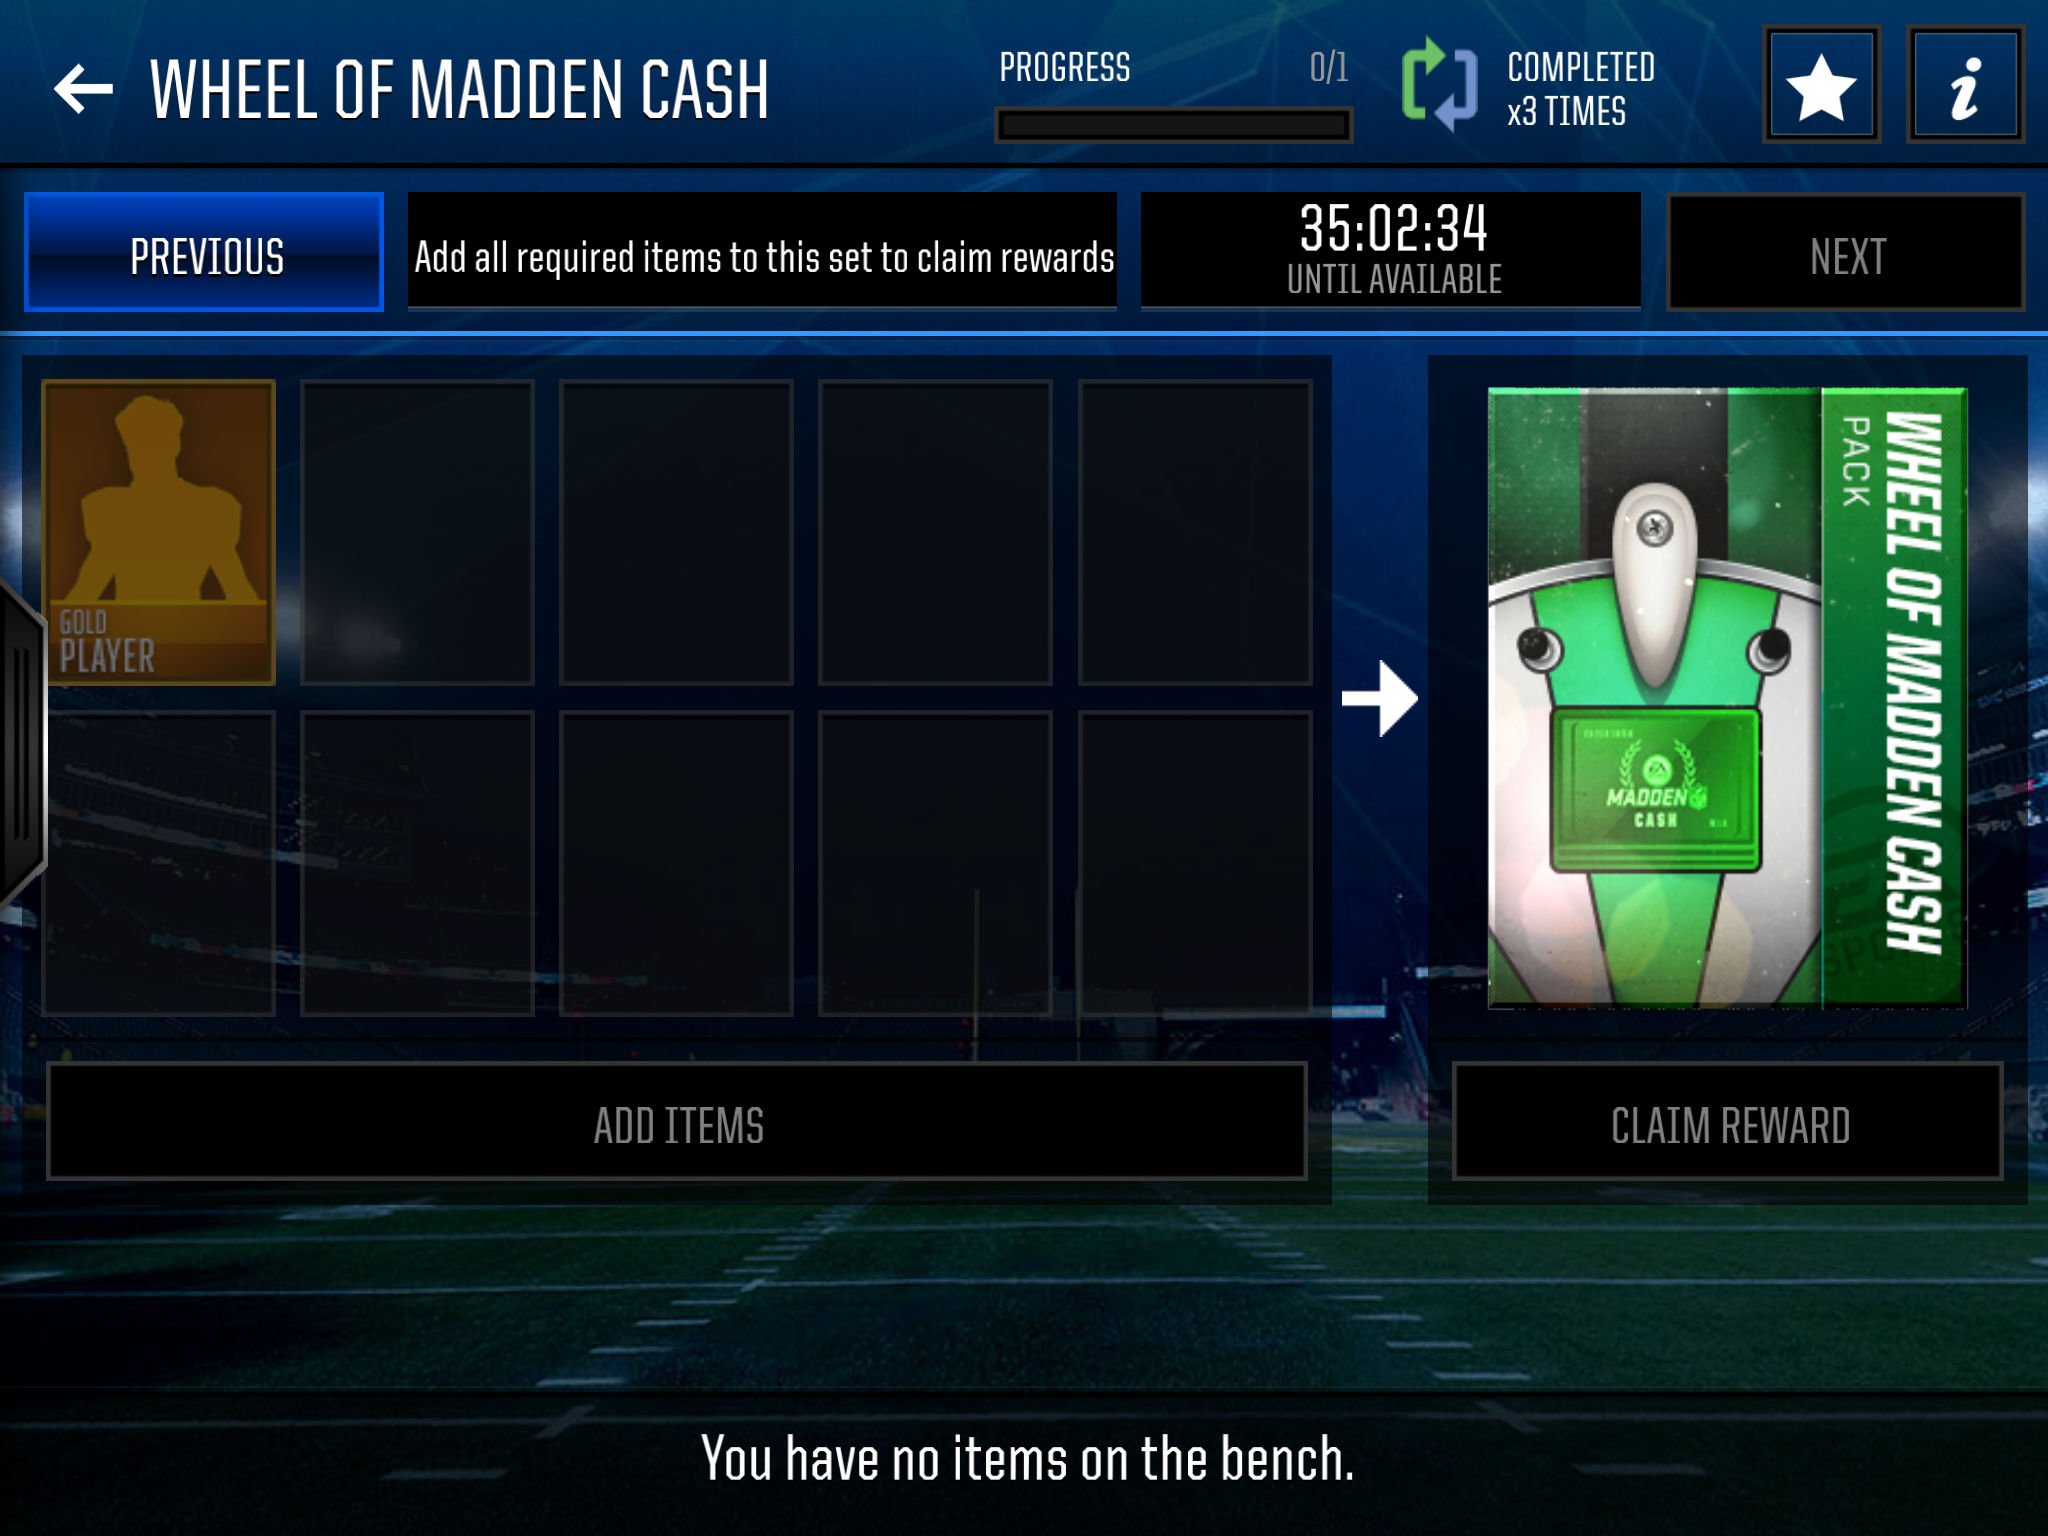 How to Get Free Madden Cash in Madden Mobile